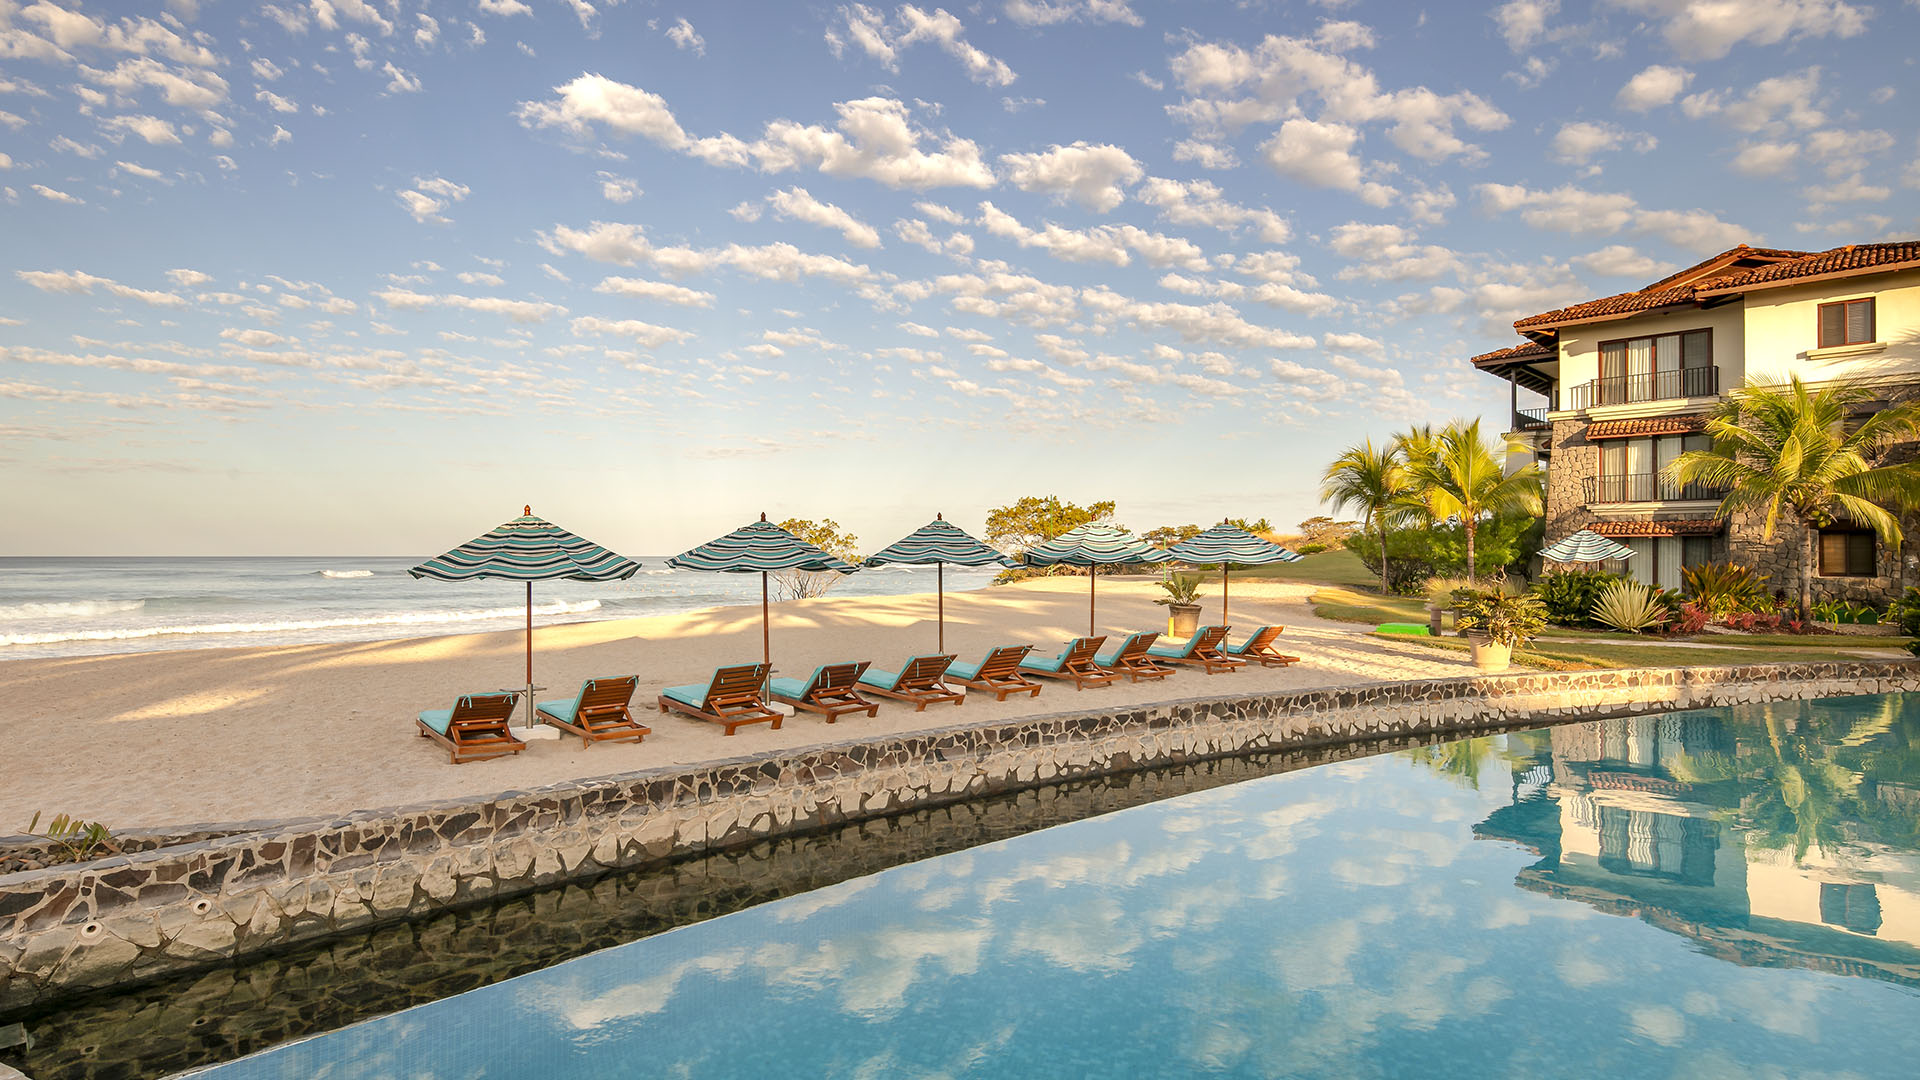 A view of a swimming pool and beach at JW Marriott Guanacaste Resort & Spa